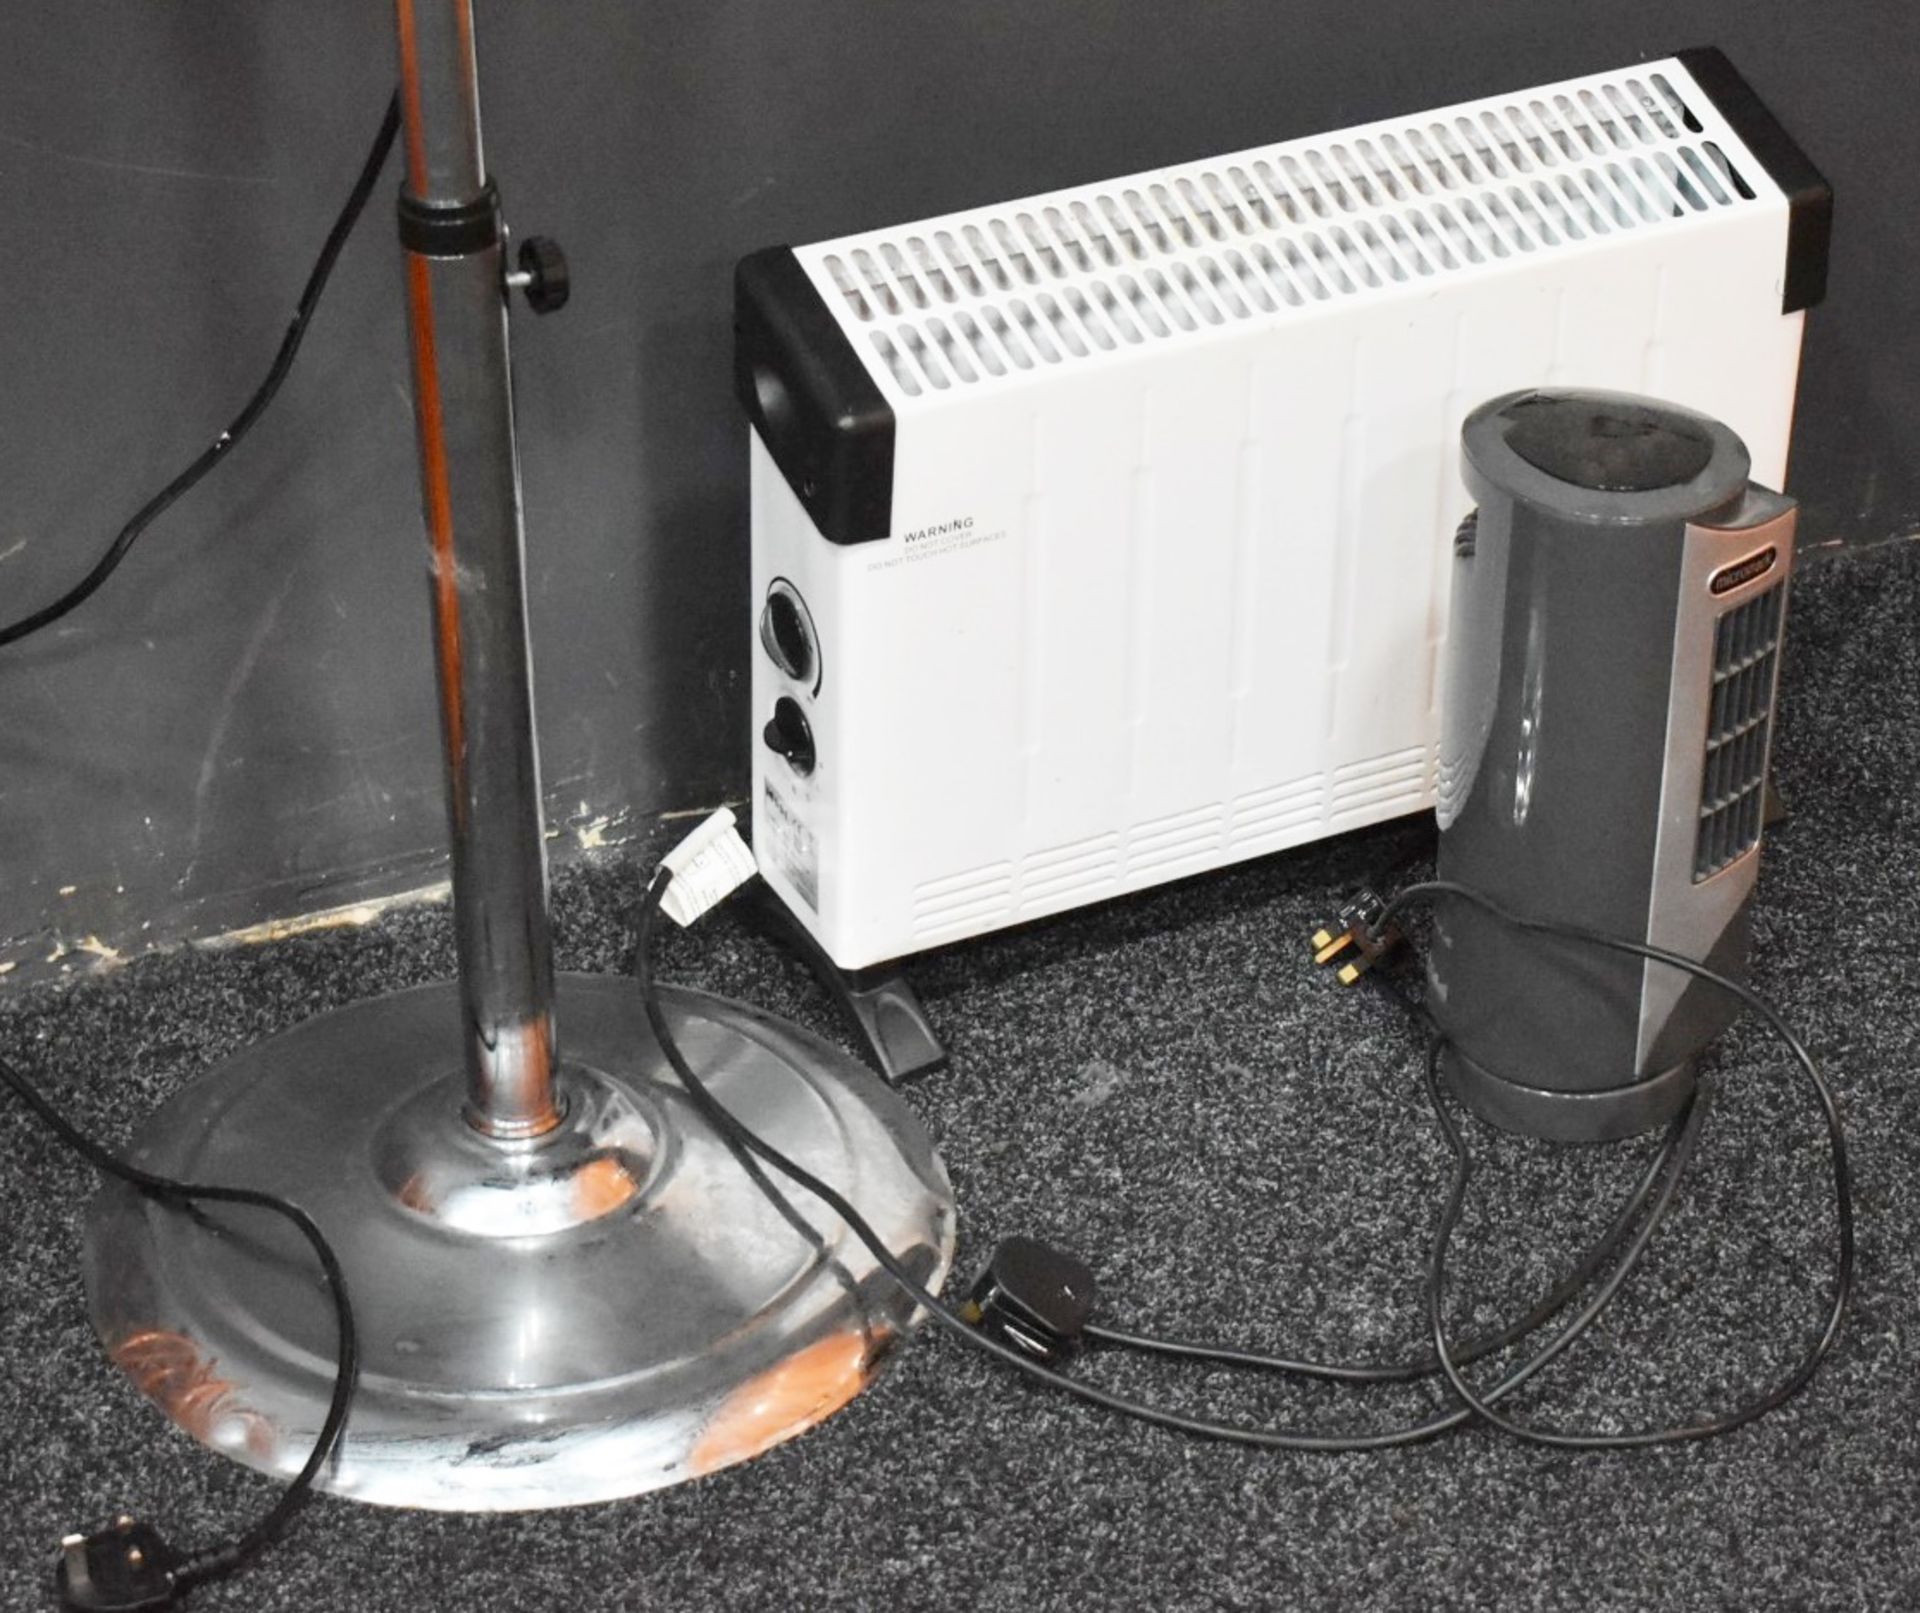 3 x Various Heaters and Fans - Includes Chrome Fan Pedestal, Mini Fan and Heater - Image 2 of 3